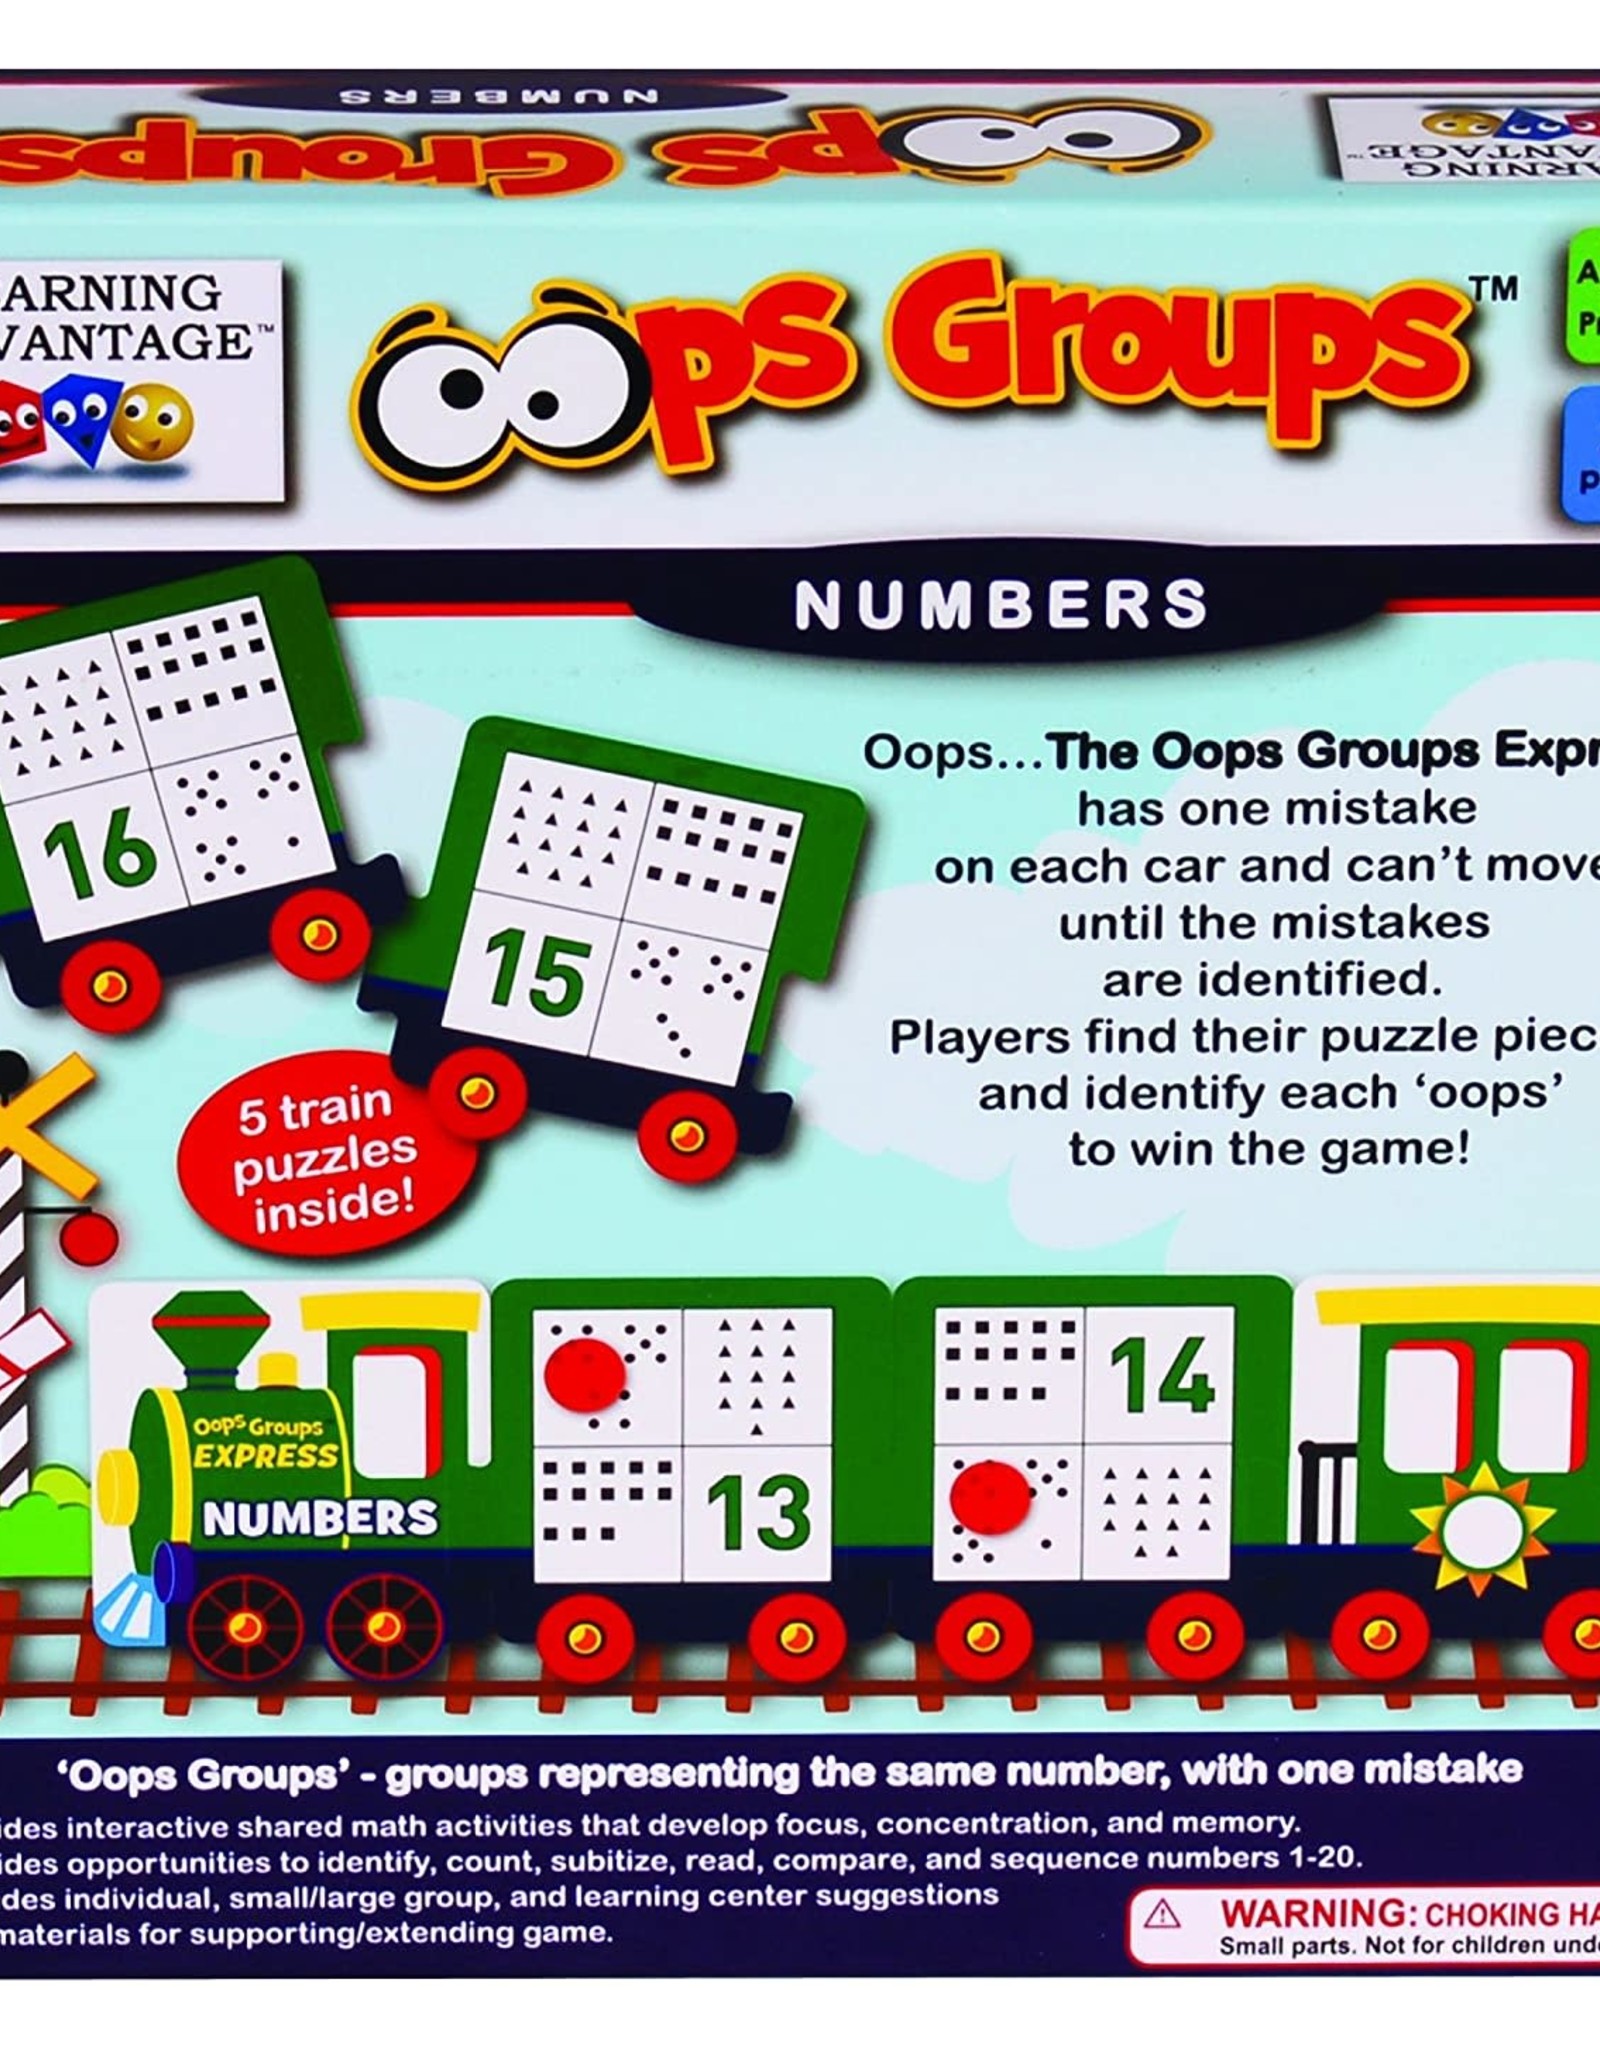 LEARNING ADVANTAGE Oops Groups - Numbers